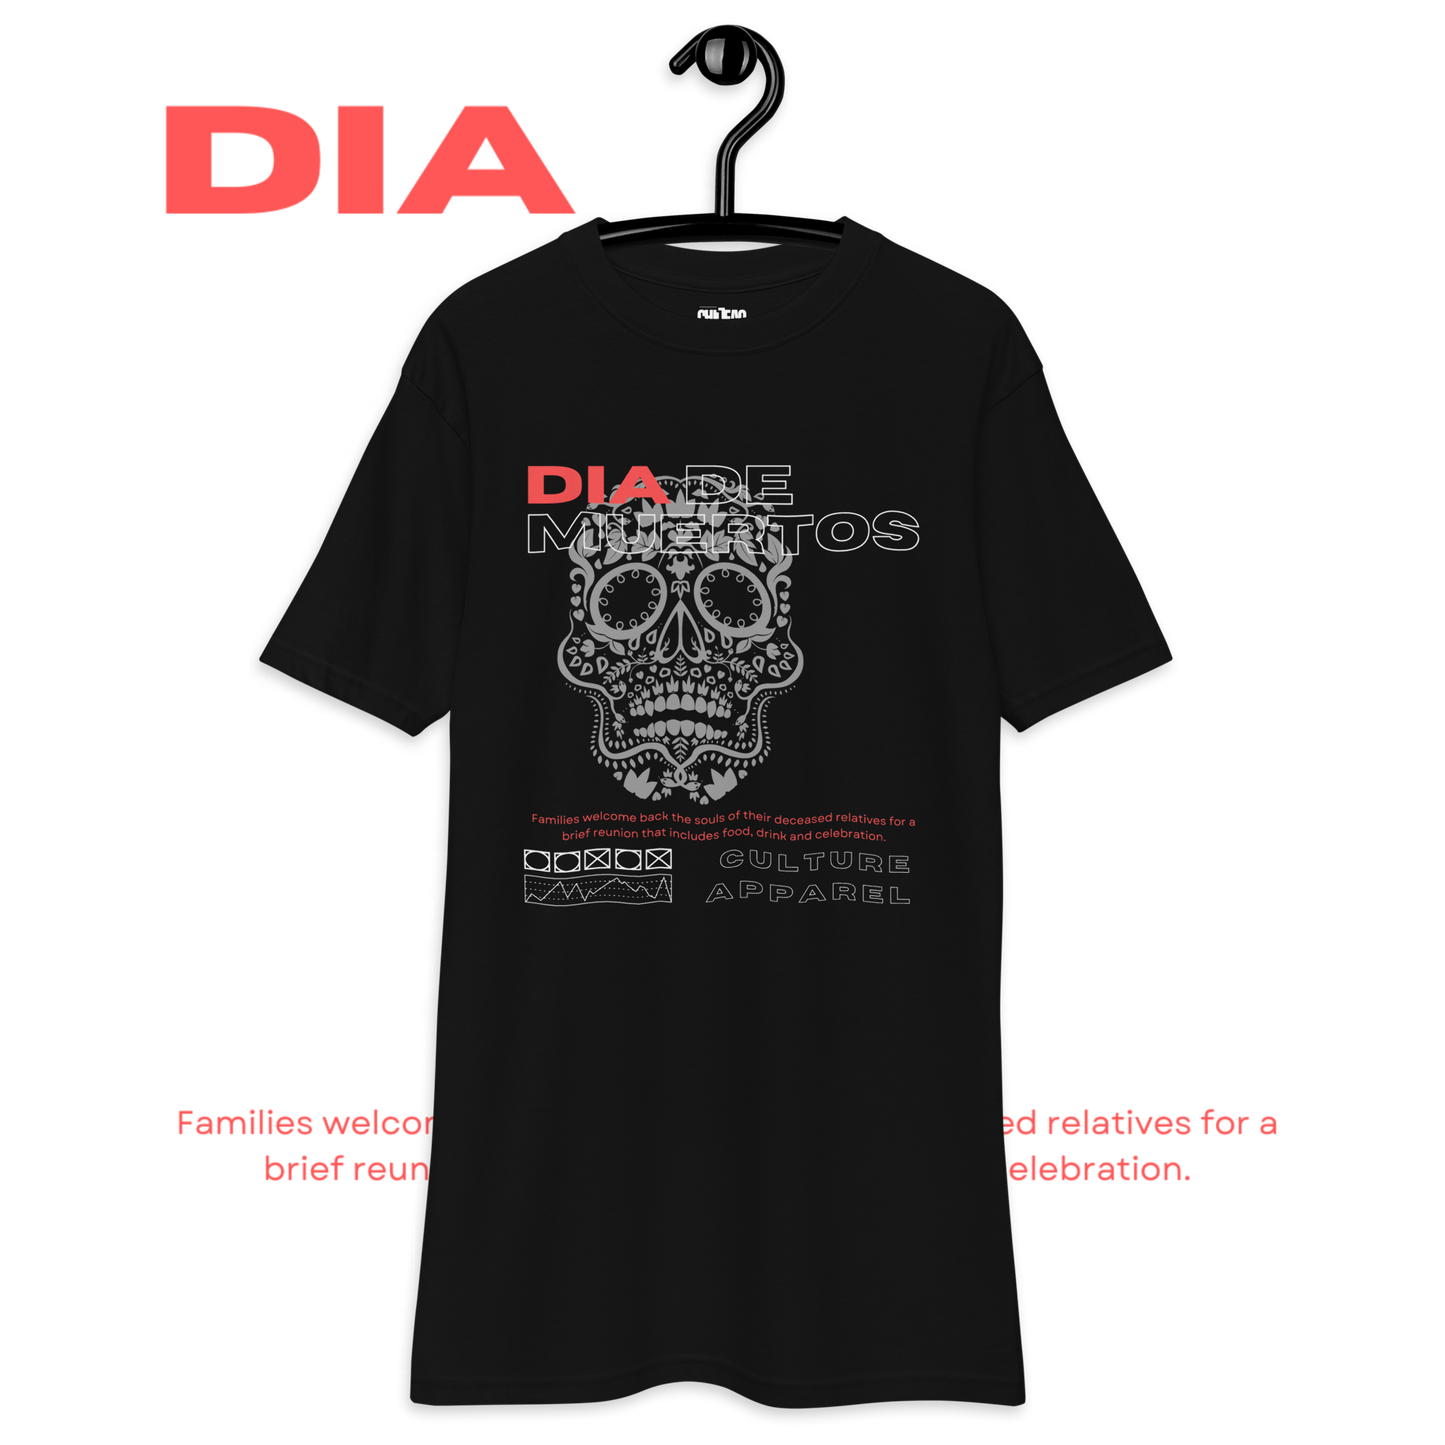 CHILLEAO "STAY DIA DE MUERTOS" CULTURE APPAREL COLLECTION "WEARING THE TRADITIONS"